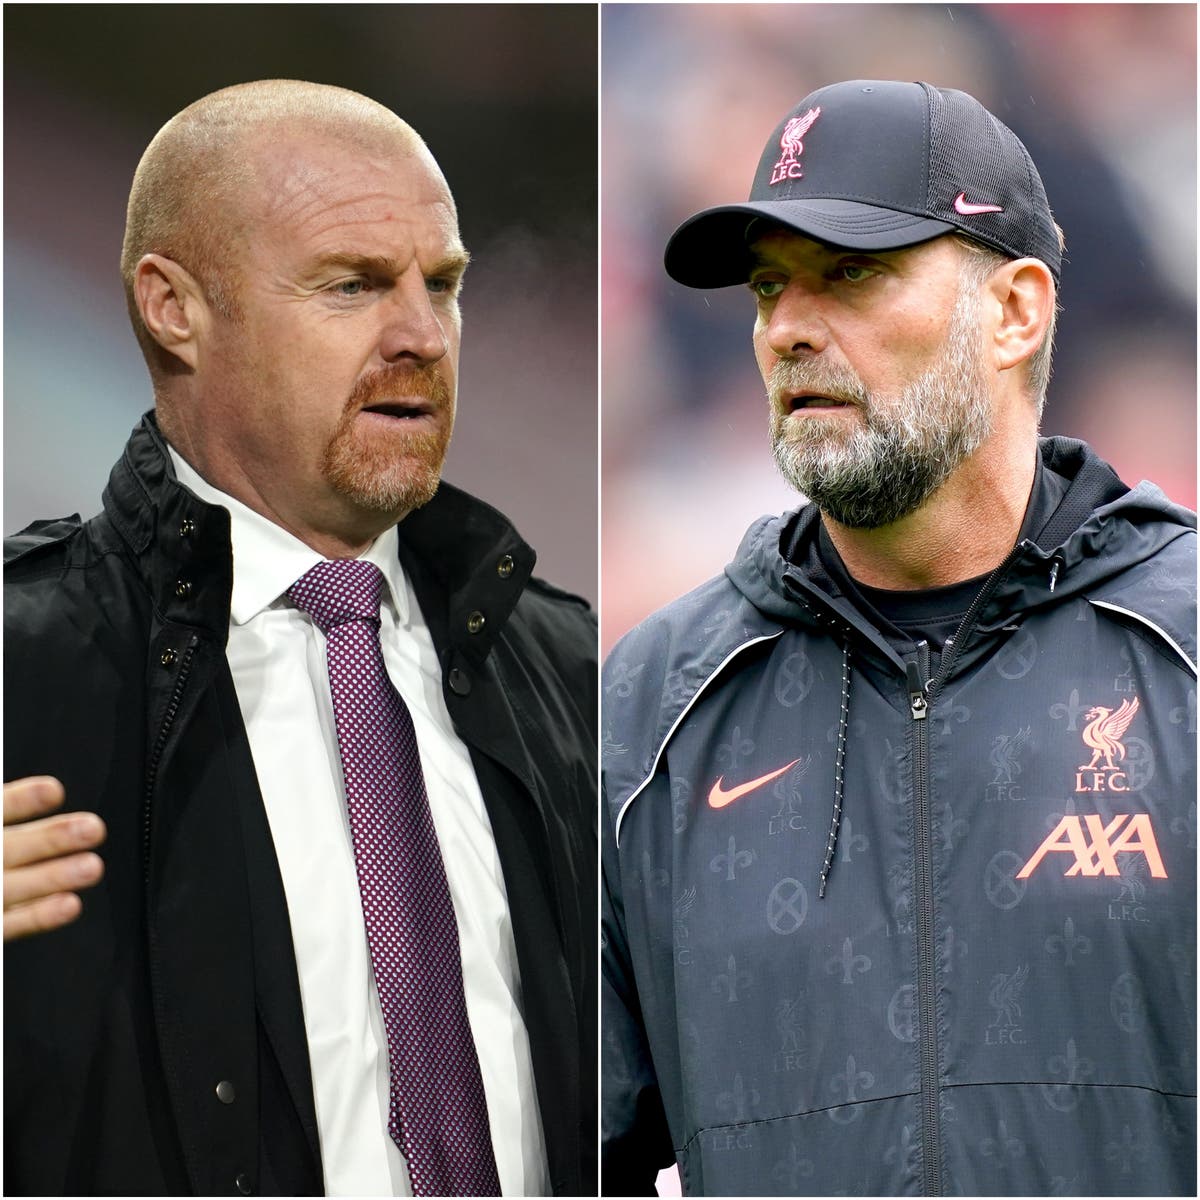 Jurgen Klopp ‘wrong’ to single out Burnley players, says Sean Dyche